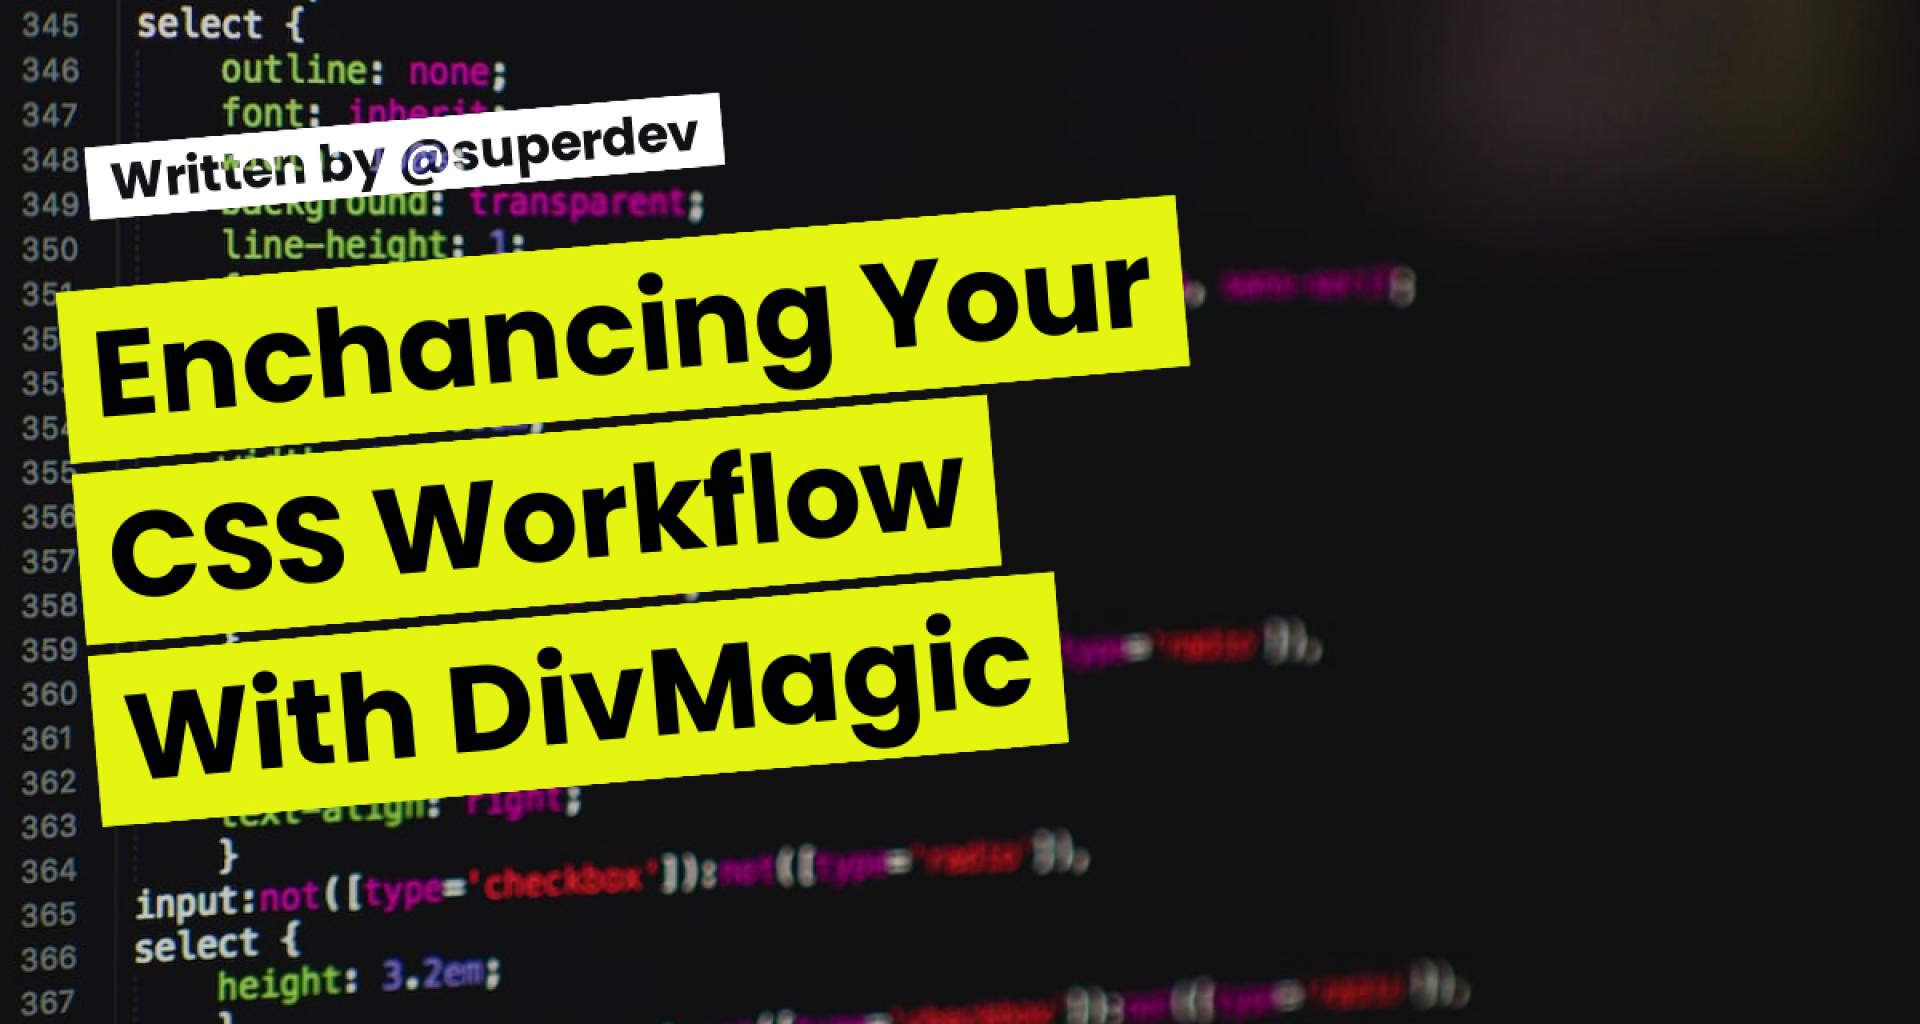 Enchancing Your CSS Workflow With DivMagic